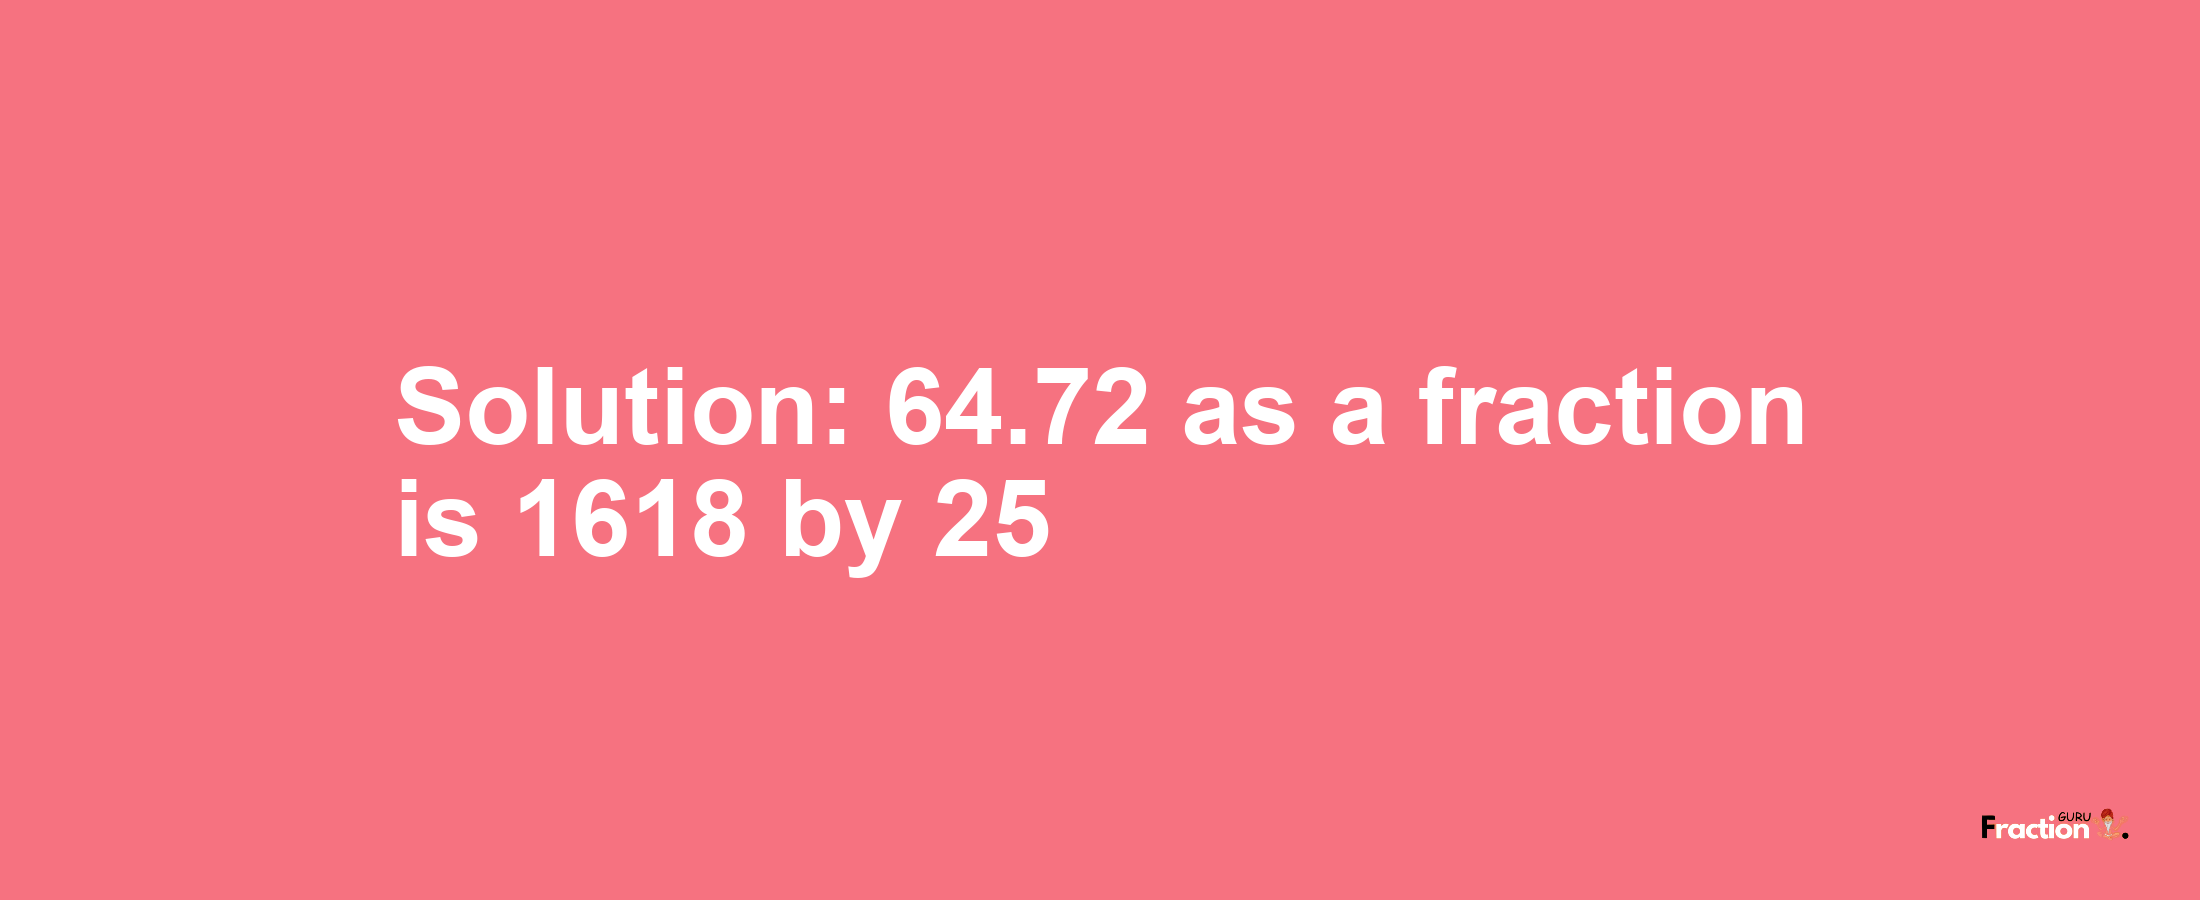 Solution:64.72 as a fraction is 1618/25